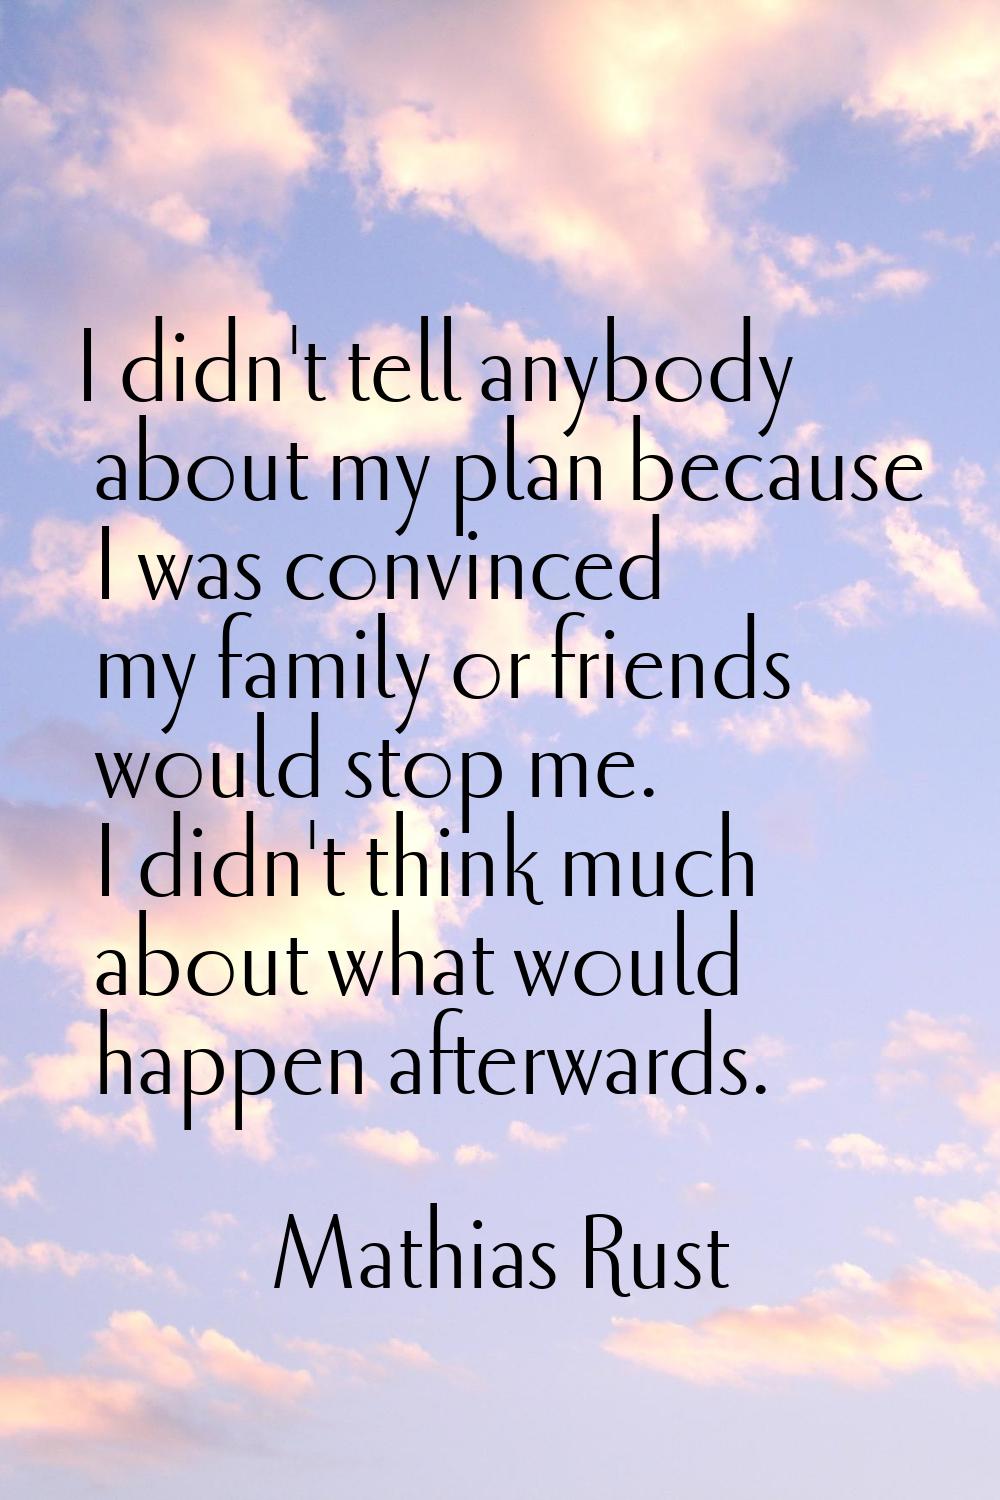 I didn't tell anybody about my plan because I was convinced my family or friends would stop me. I d